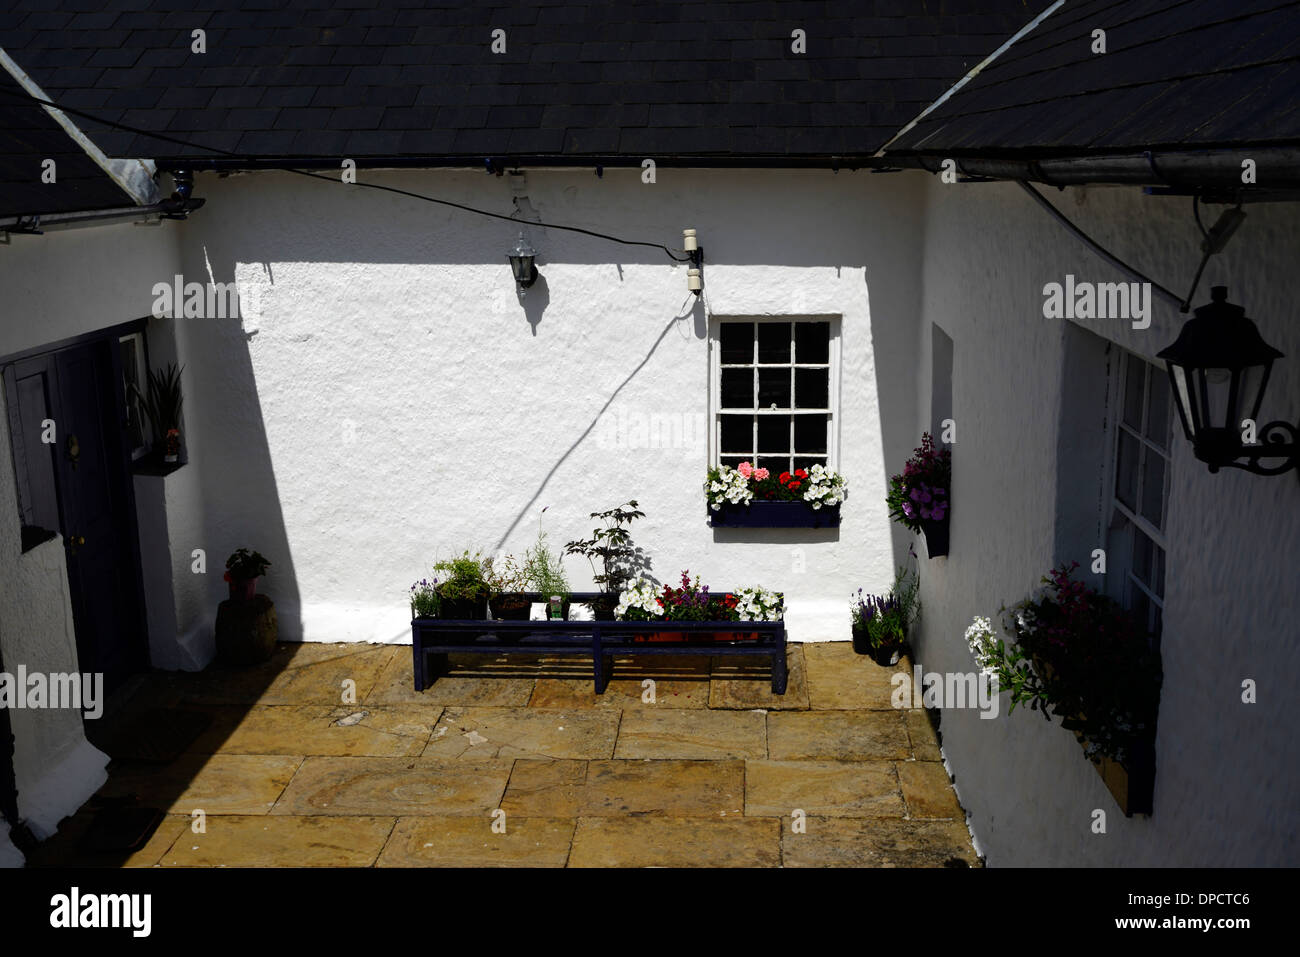 courtyard painted white walls sun trap sunny patio area Stock Photo